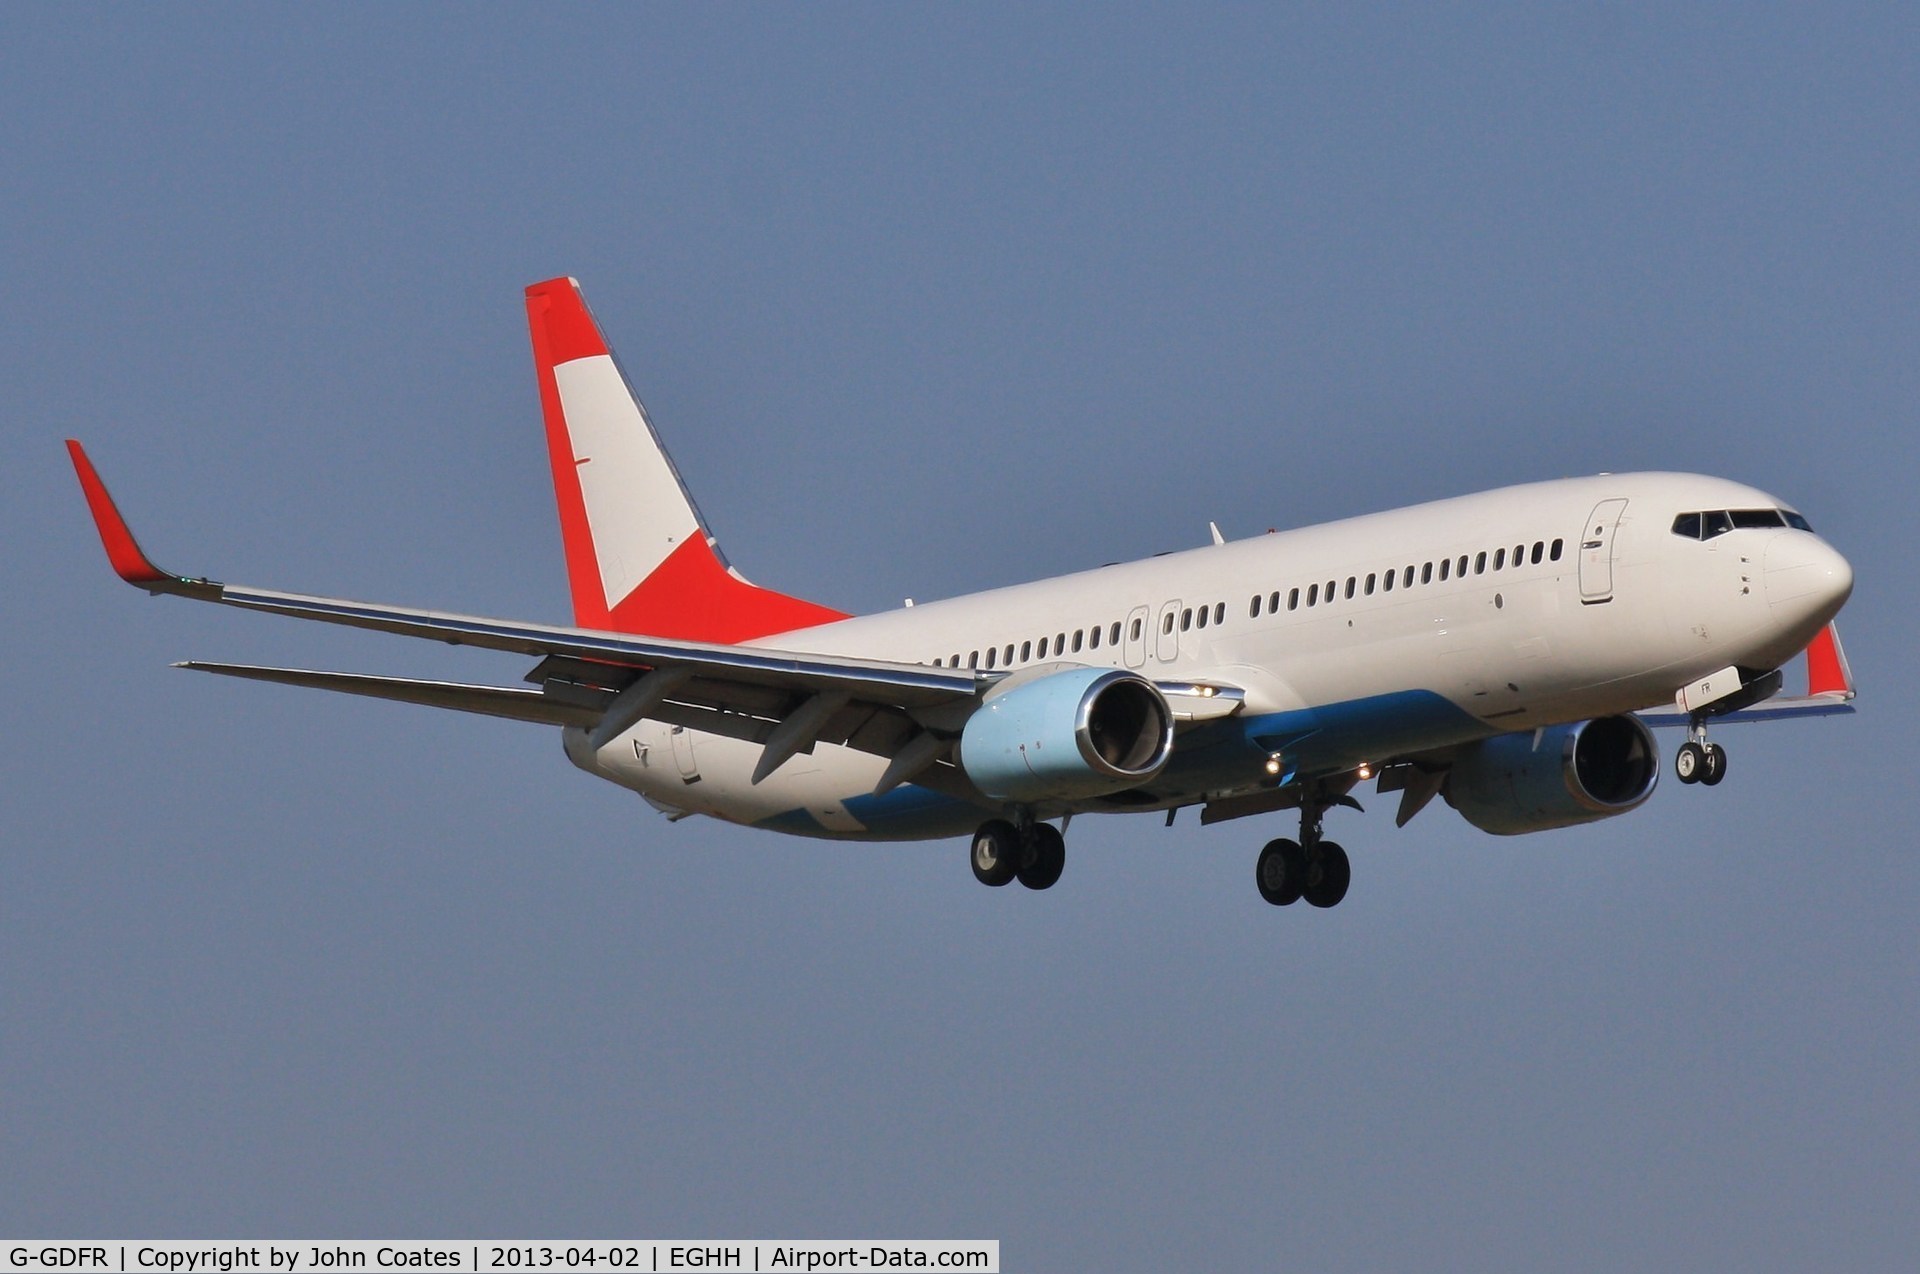 G-GDFR, 2003 Boeing 737-8Z9 C/N 30421, Arriving from Manchester for paint